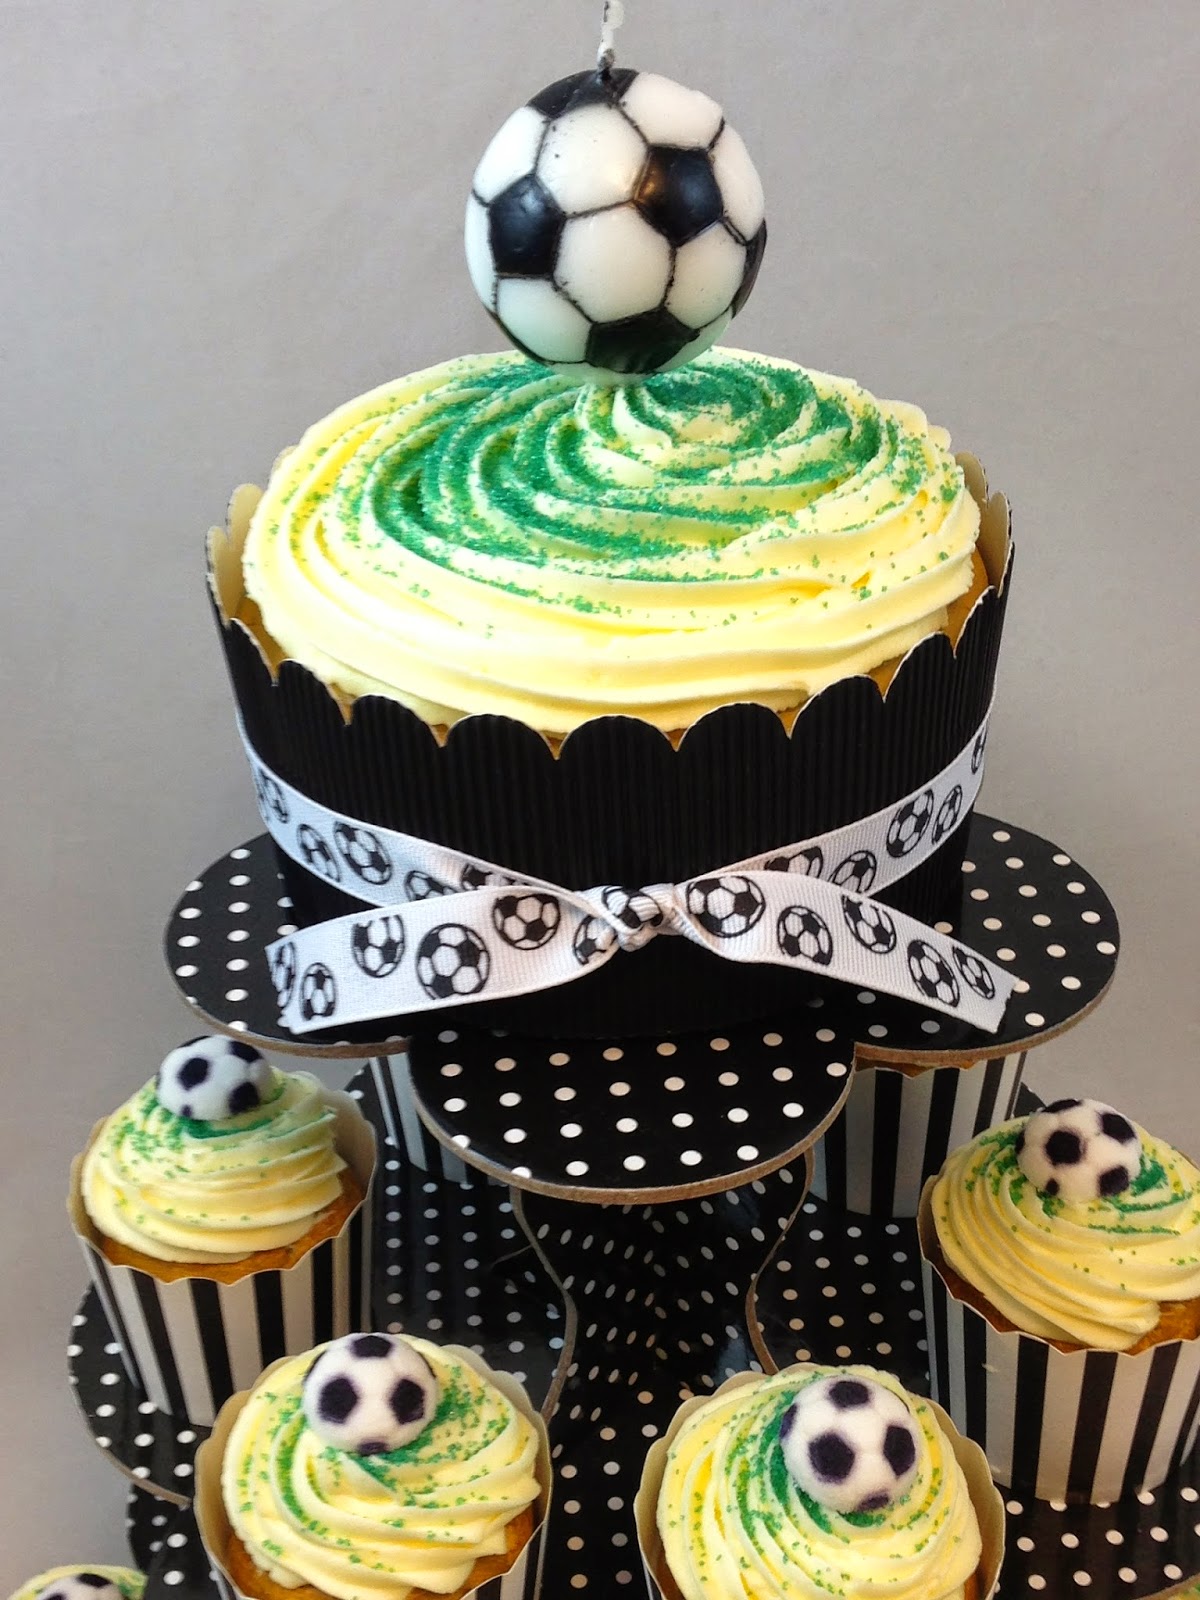 icing on the cake kits Soccer-Maxi-Kit